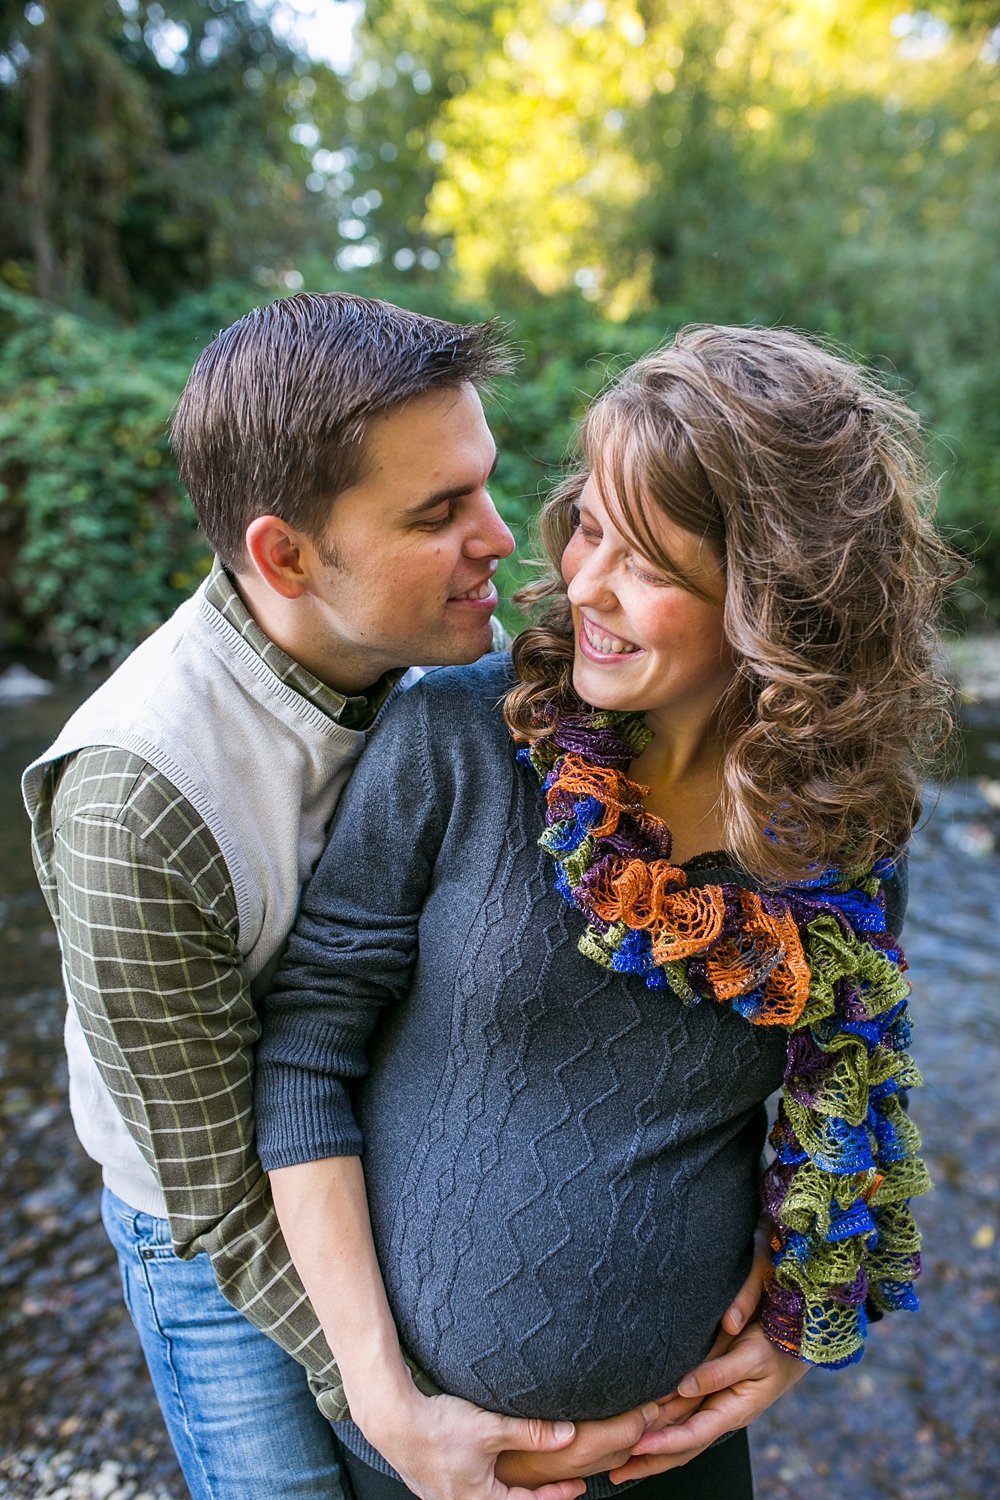 Issaquah-maternity-photography-DBK-Photography (1)